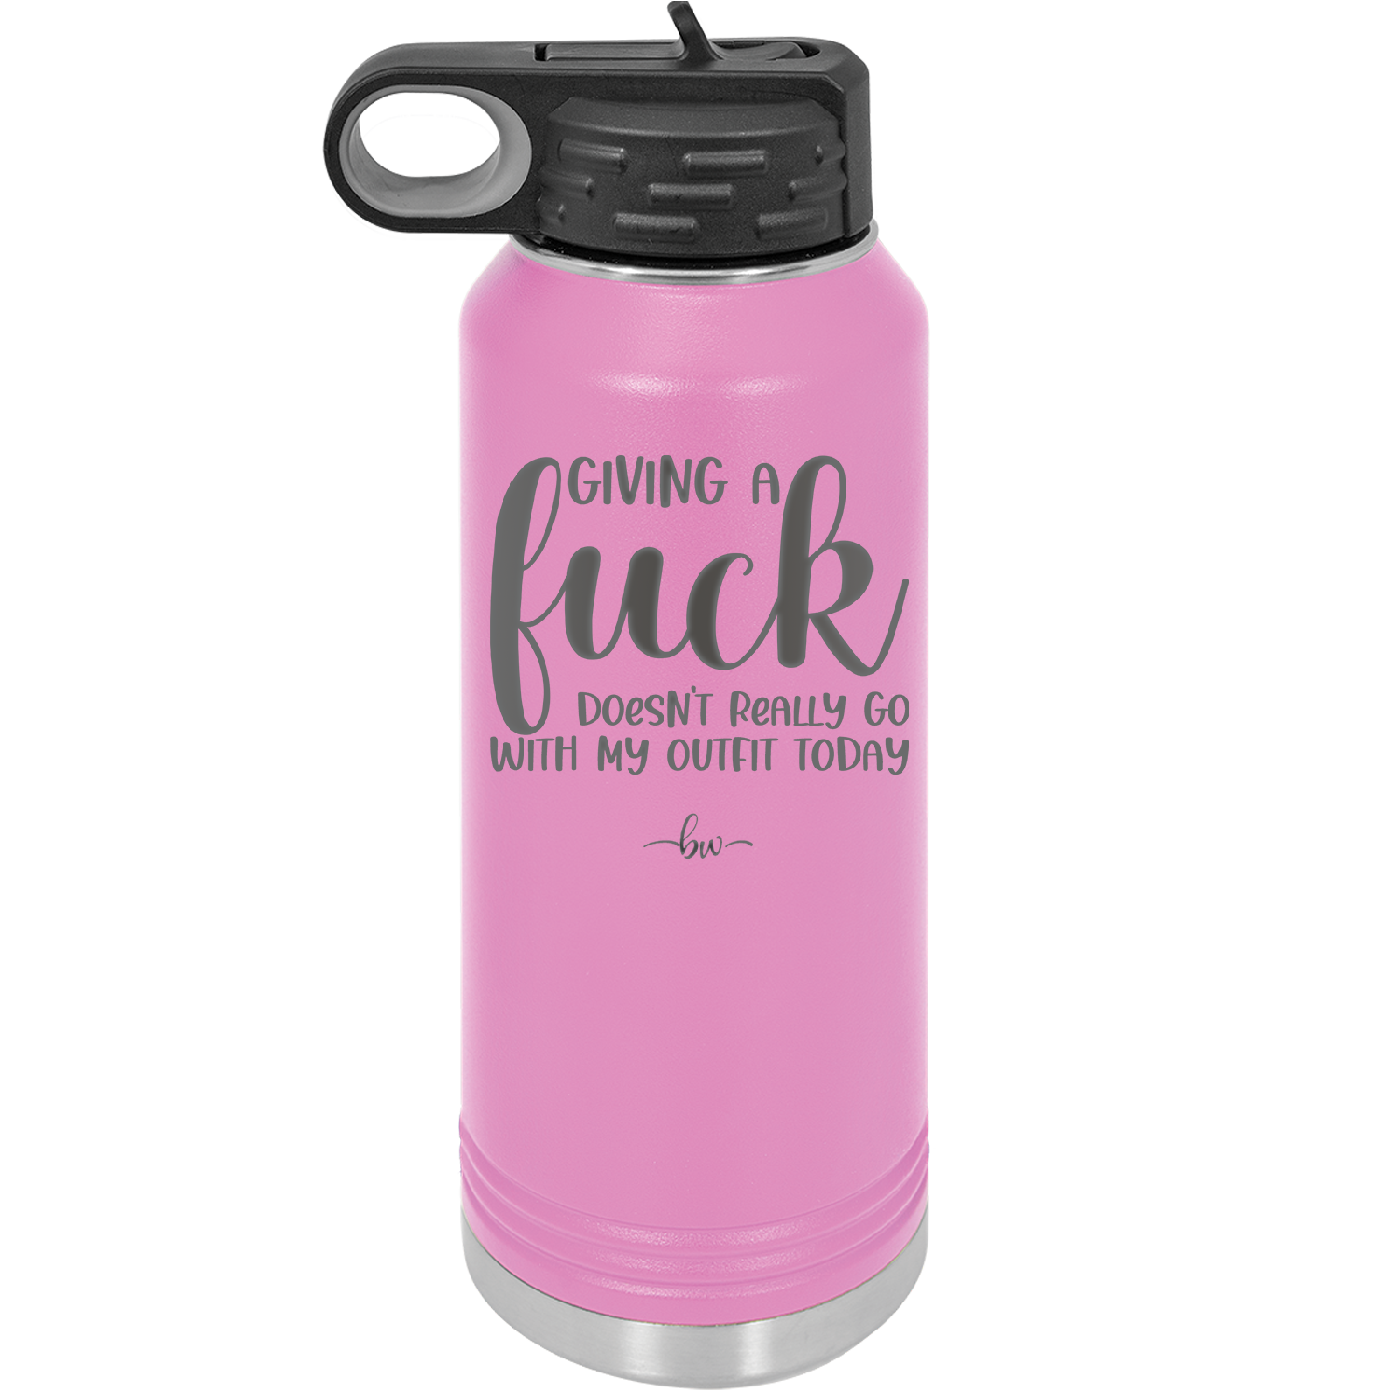 Giving a Fuck Doesn't Really Go With My Outfit Today - Laser Engraved Stainless Steel Drinkware - 2289 -